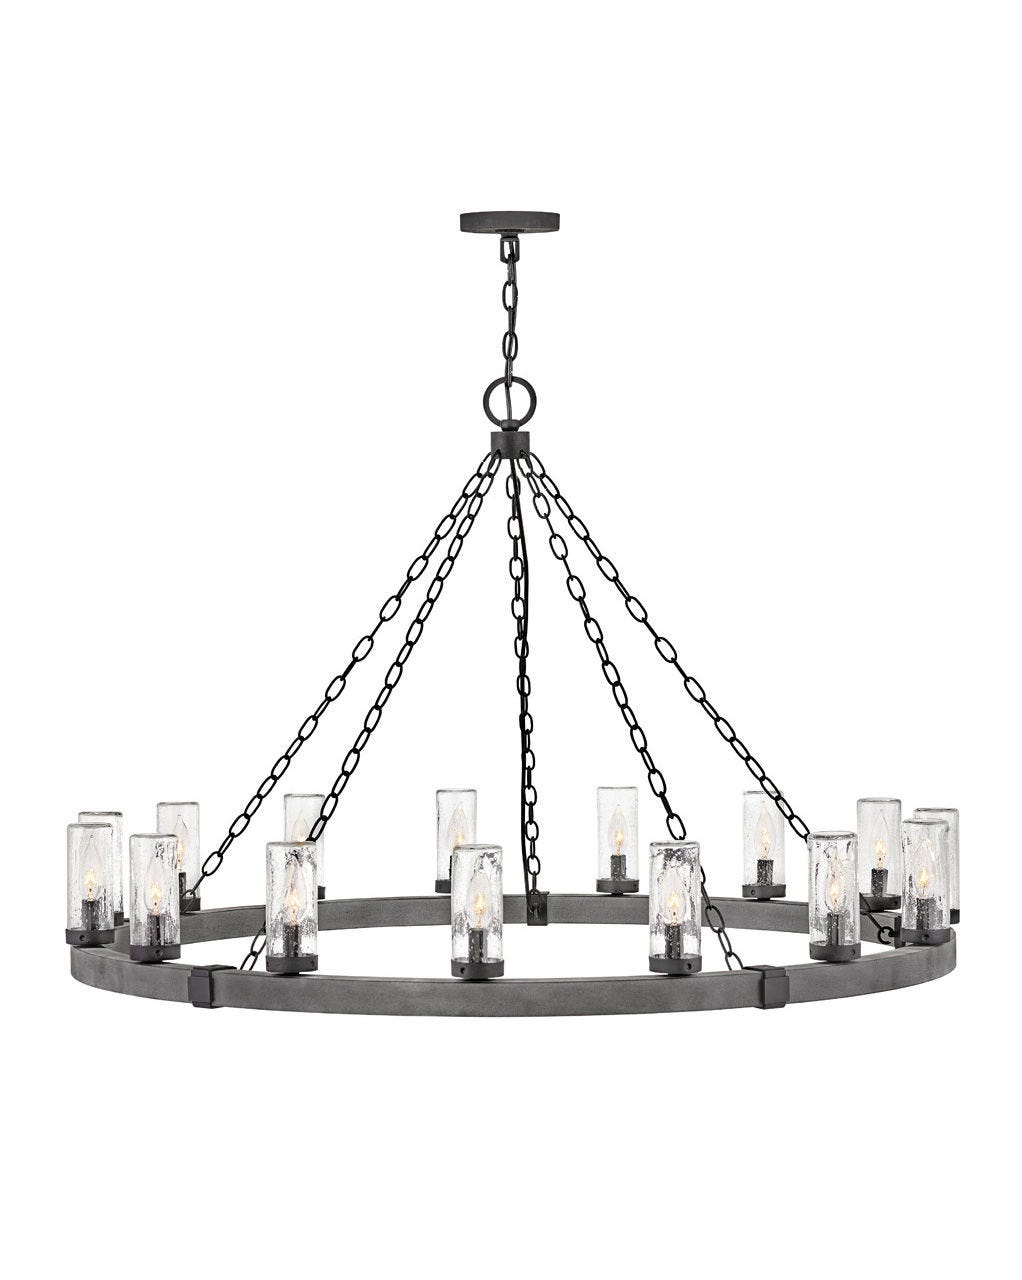 Hinkley Sawyer Chandelier Collection